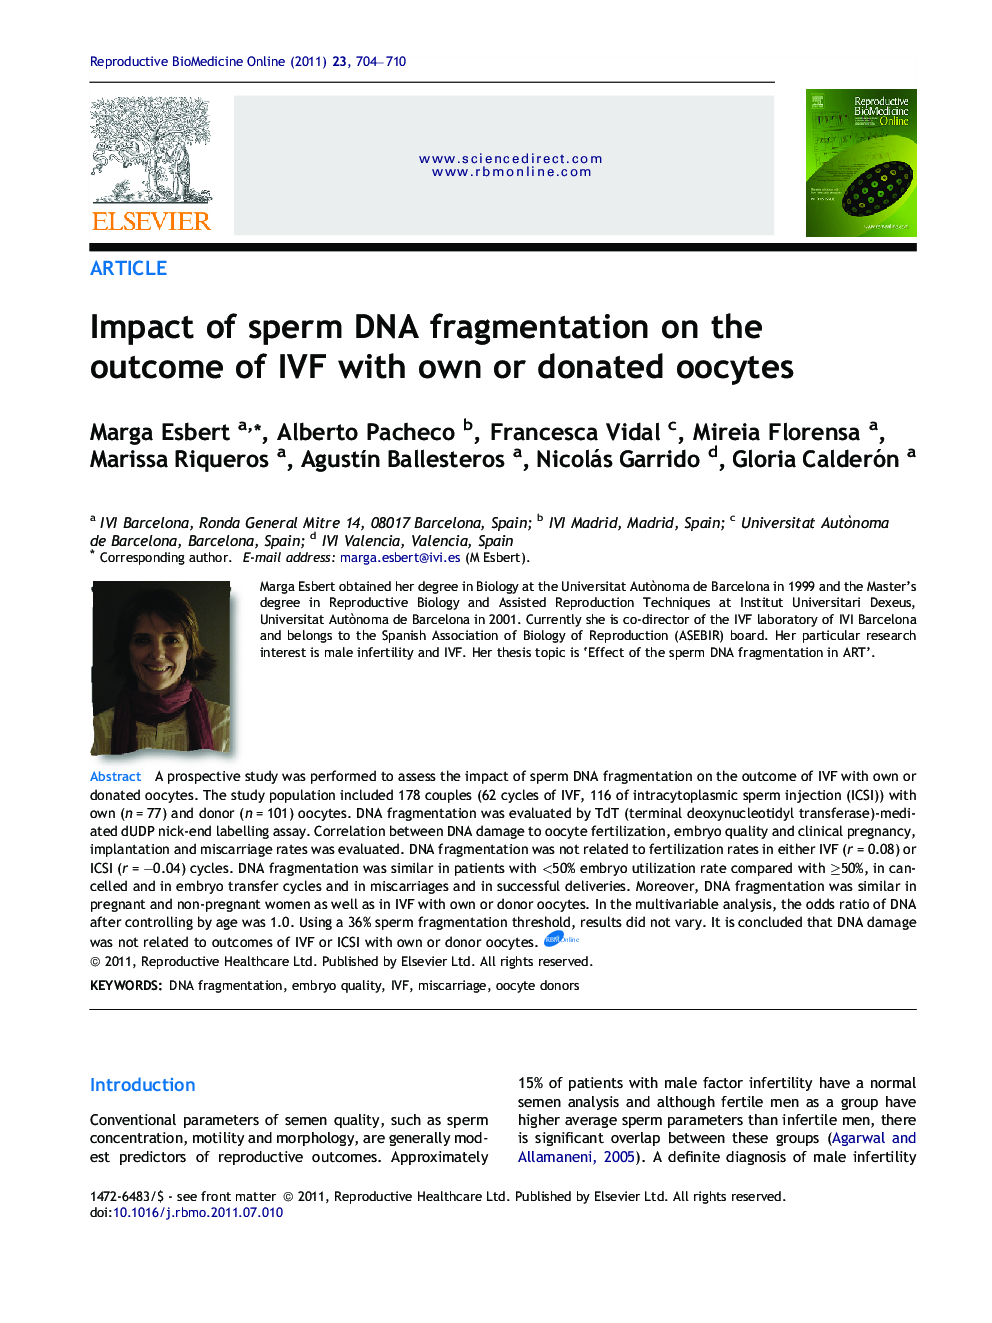 Impact of sperm DNA fragmentation on the outcome of IVF with own or donated oocytes 